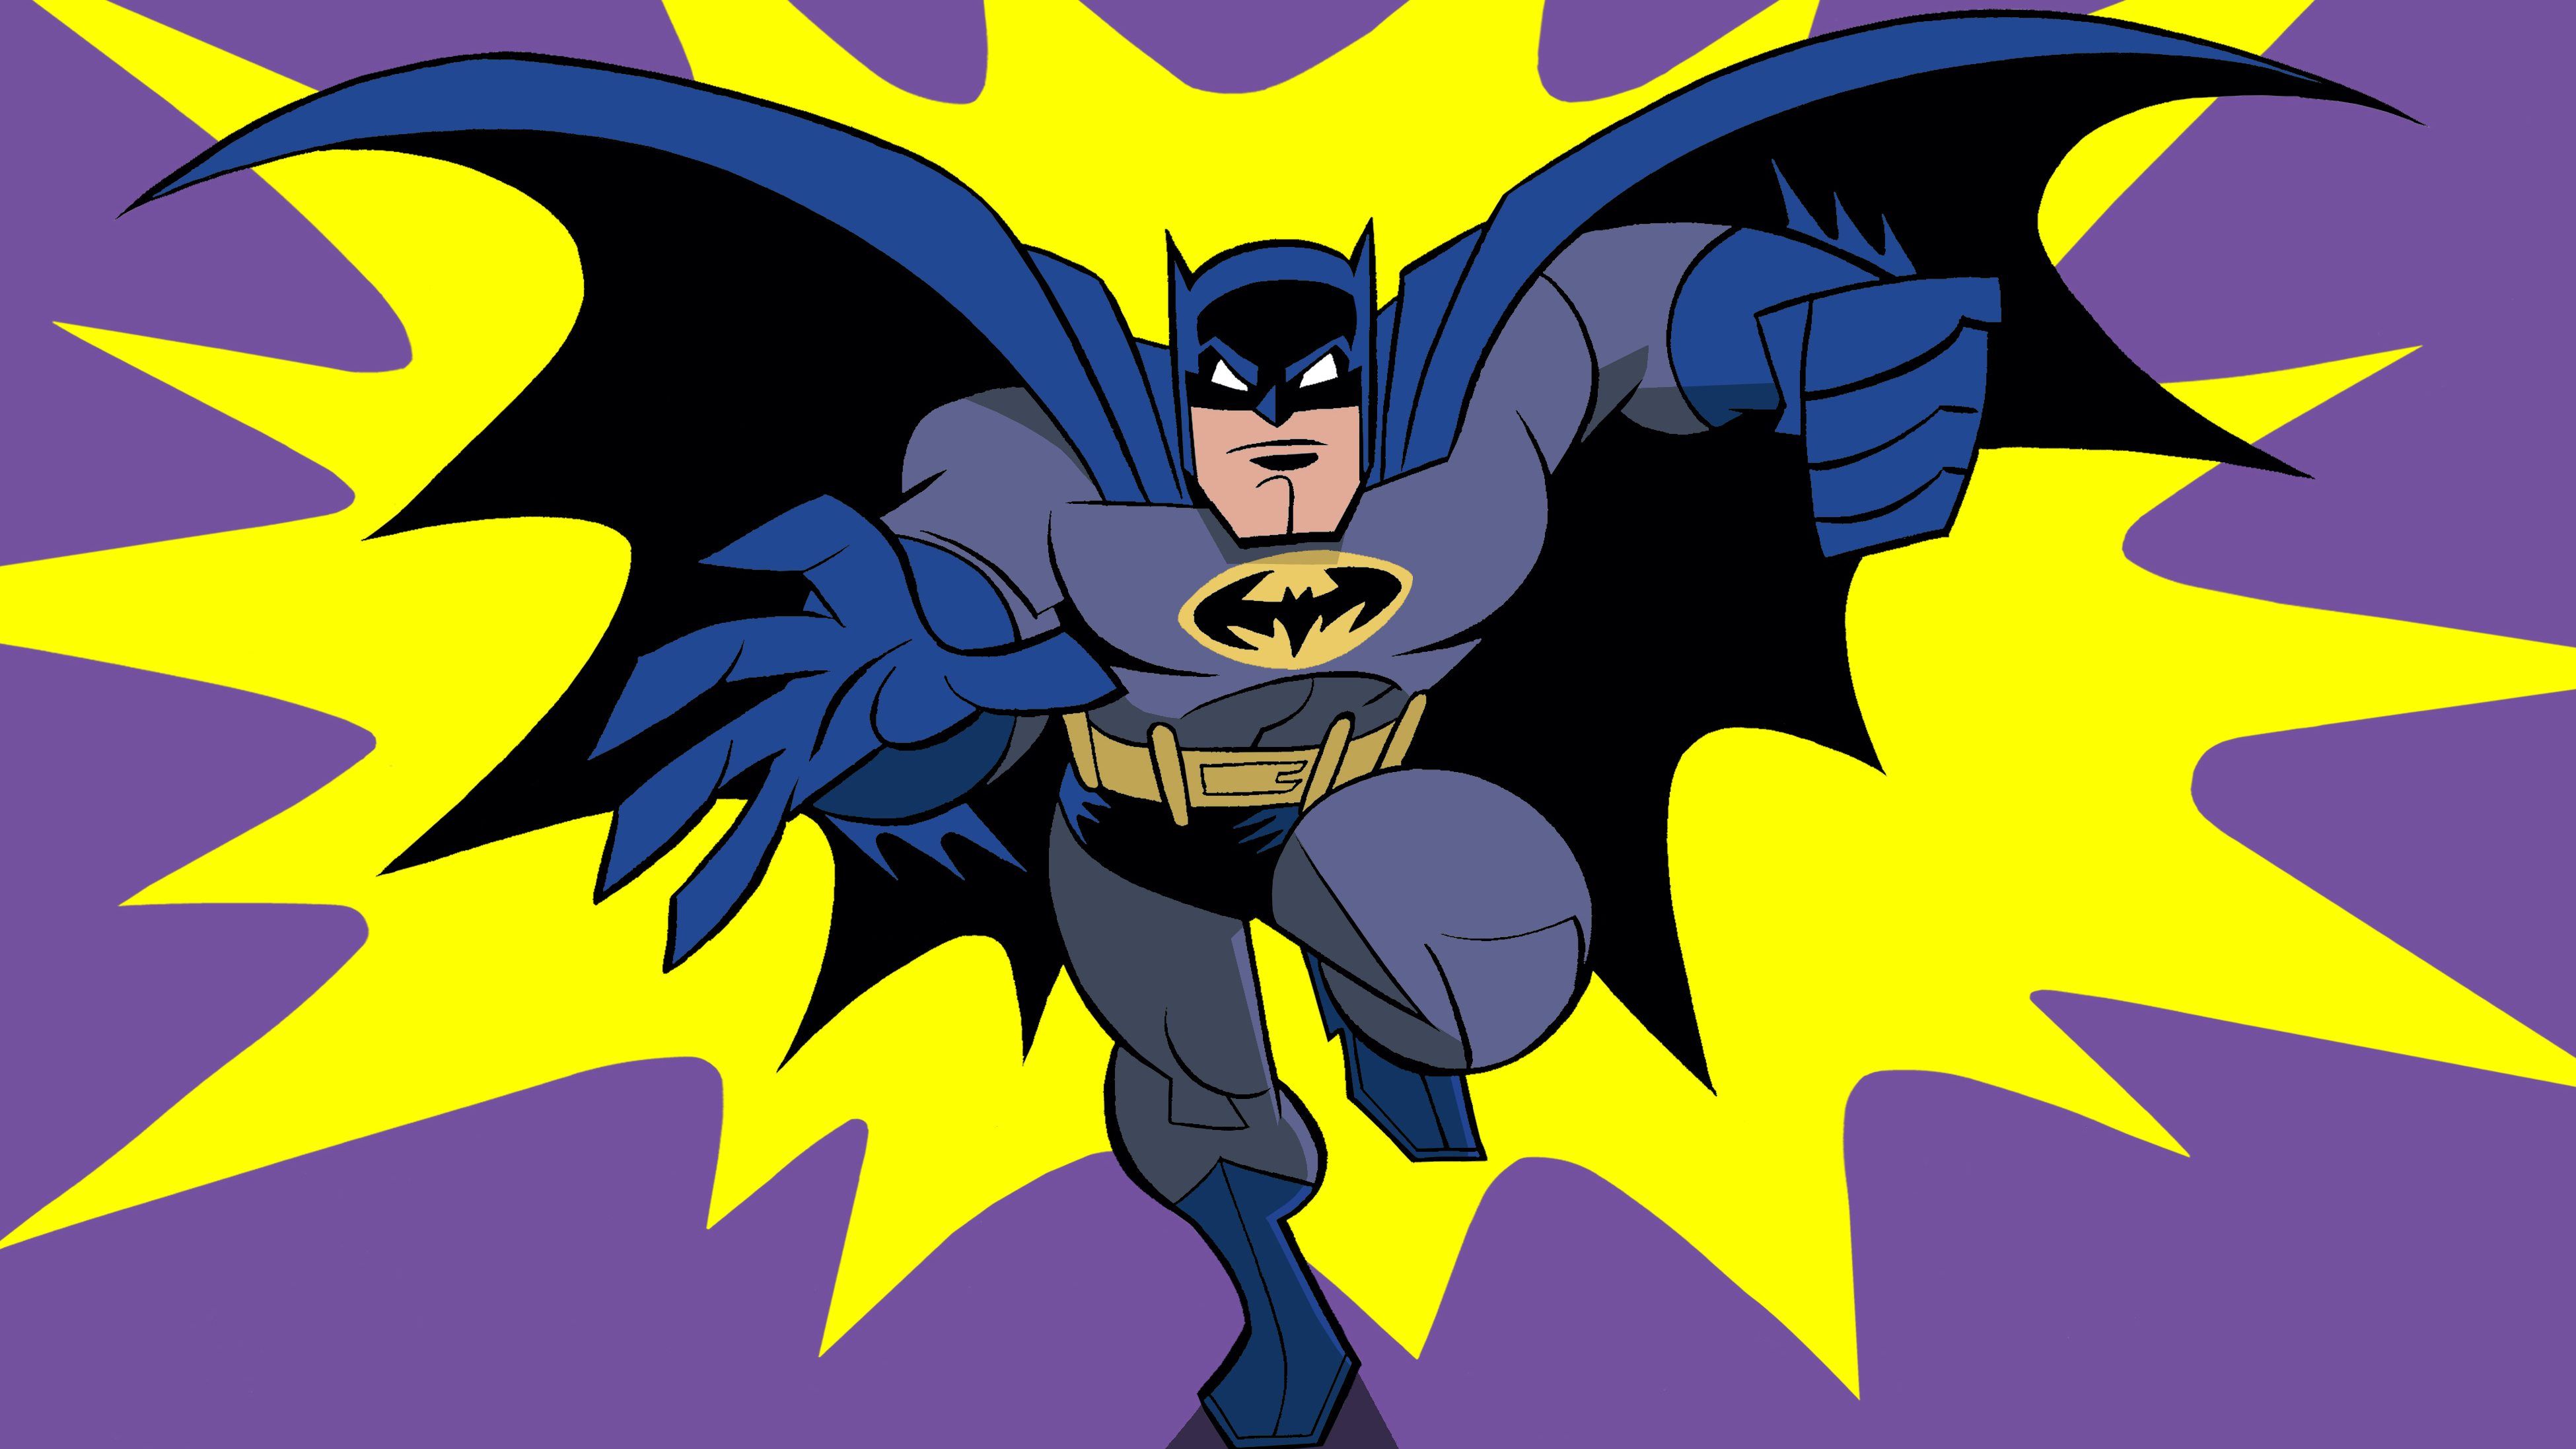 Batman: The Brave and the Bold 1080P, 2K, 4K, 5K HD wallpapers free  download